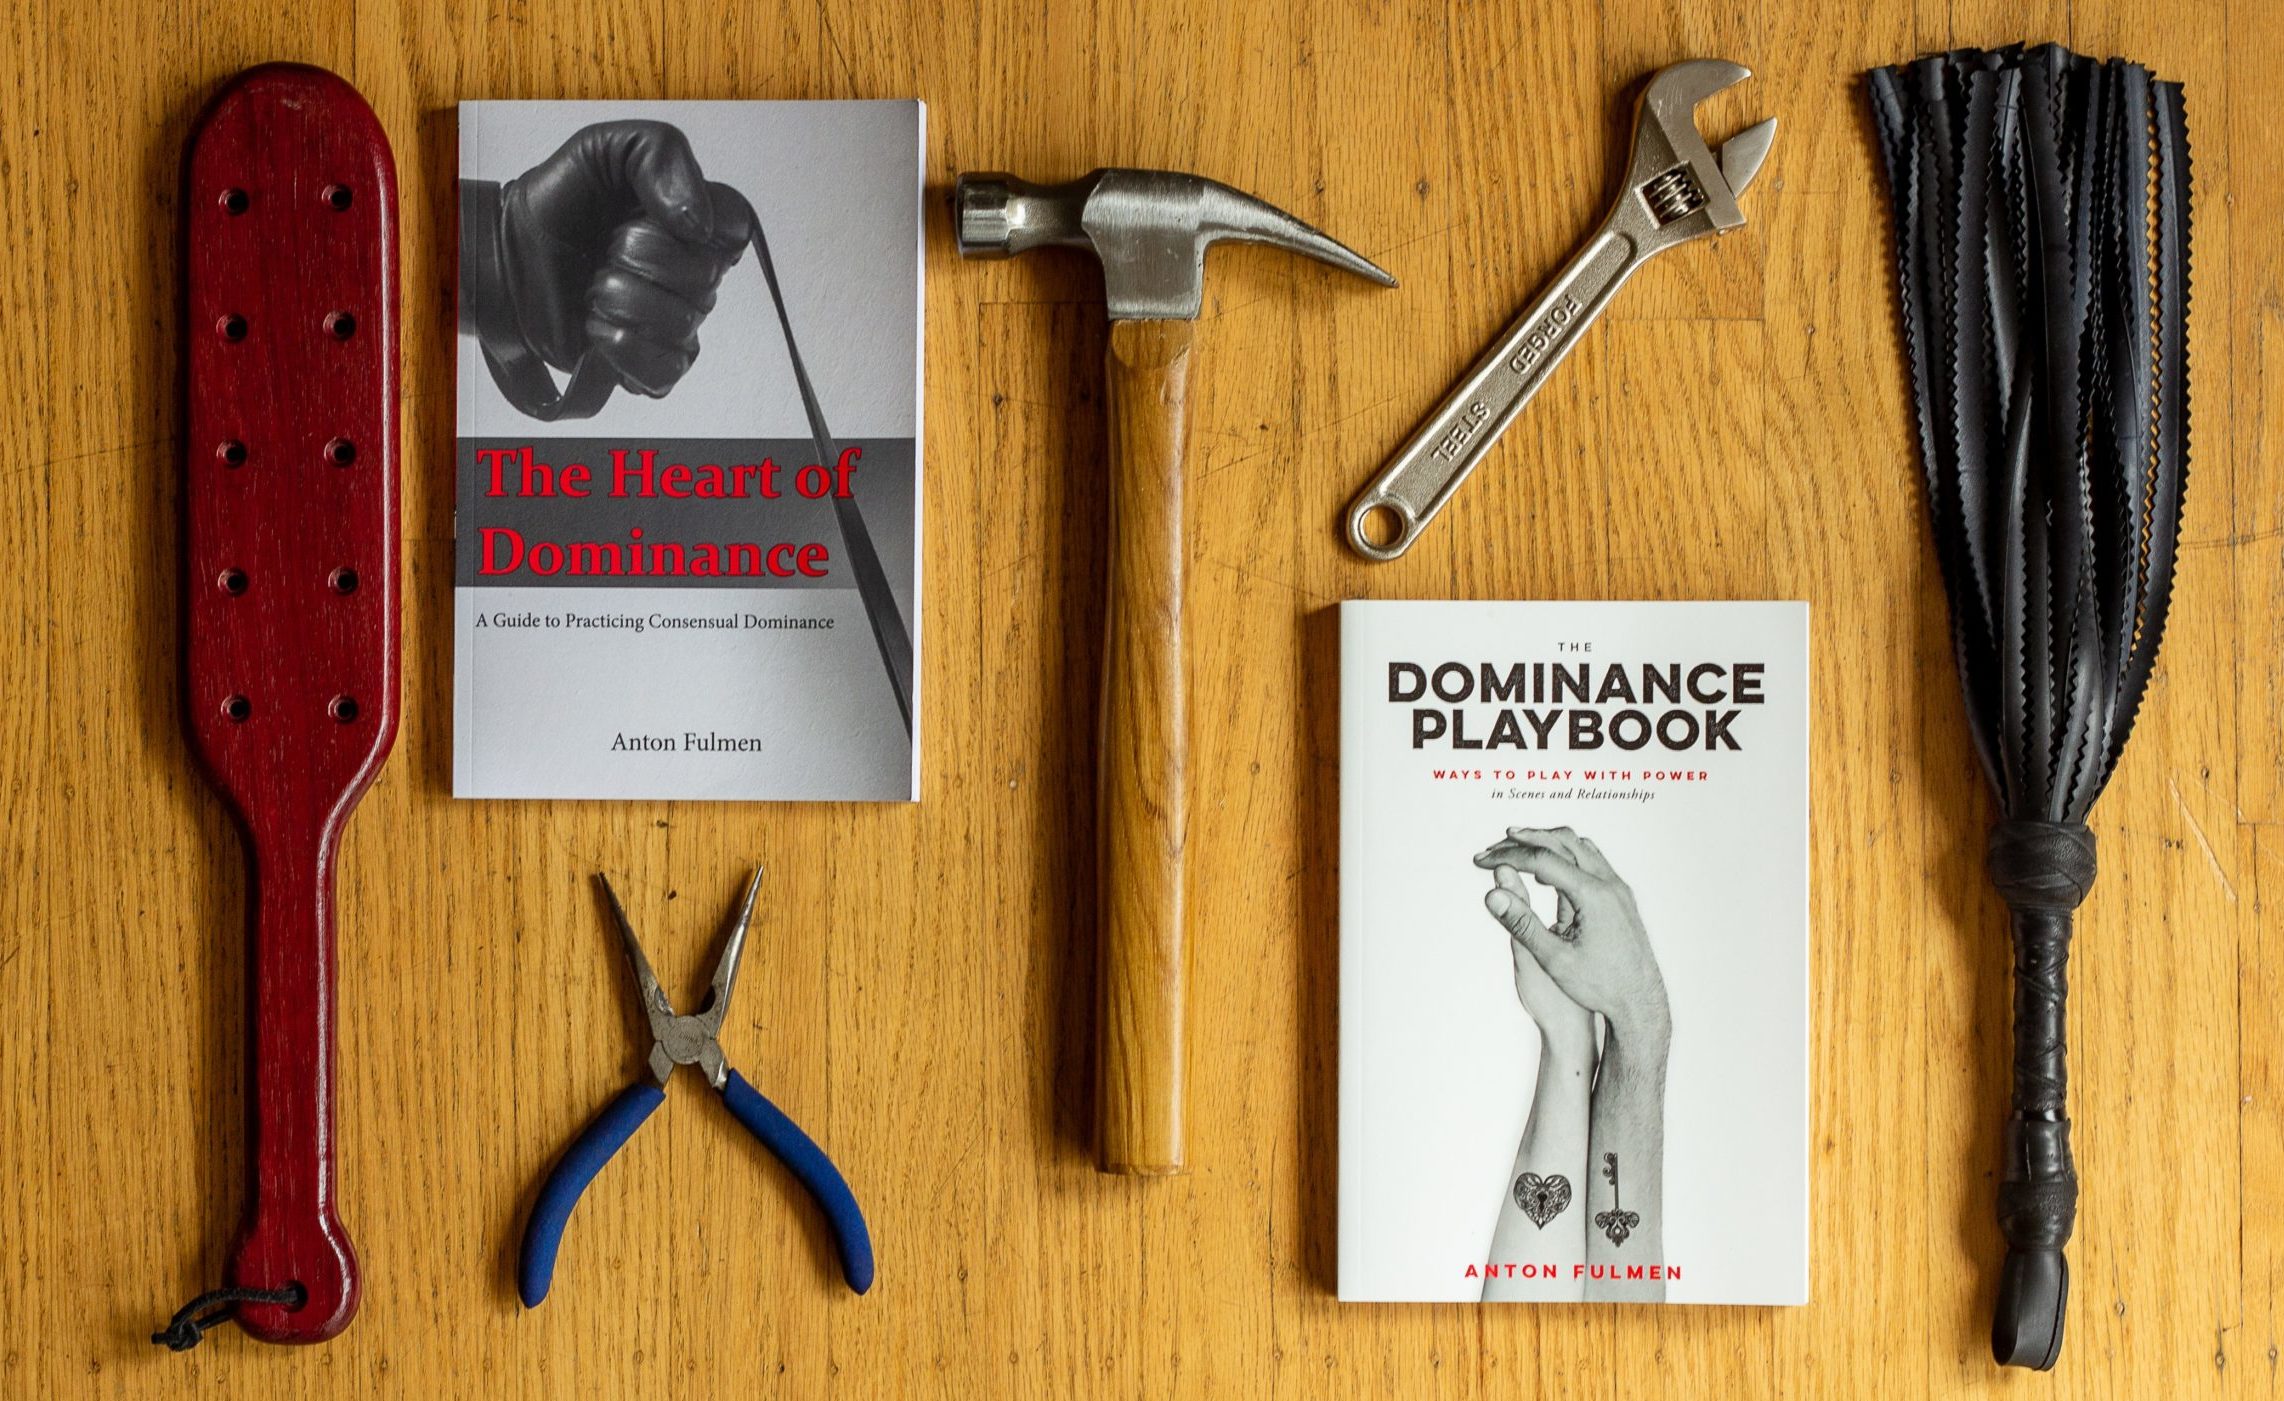 An arrangement of kinky implements mixed with construction tools